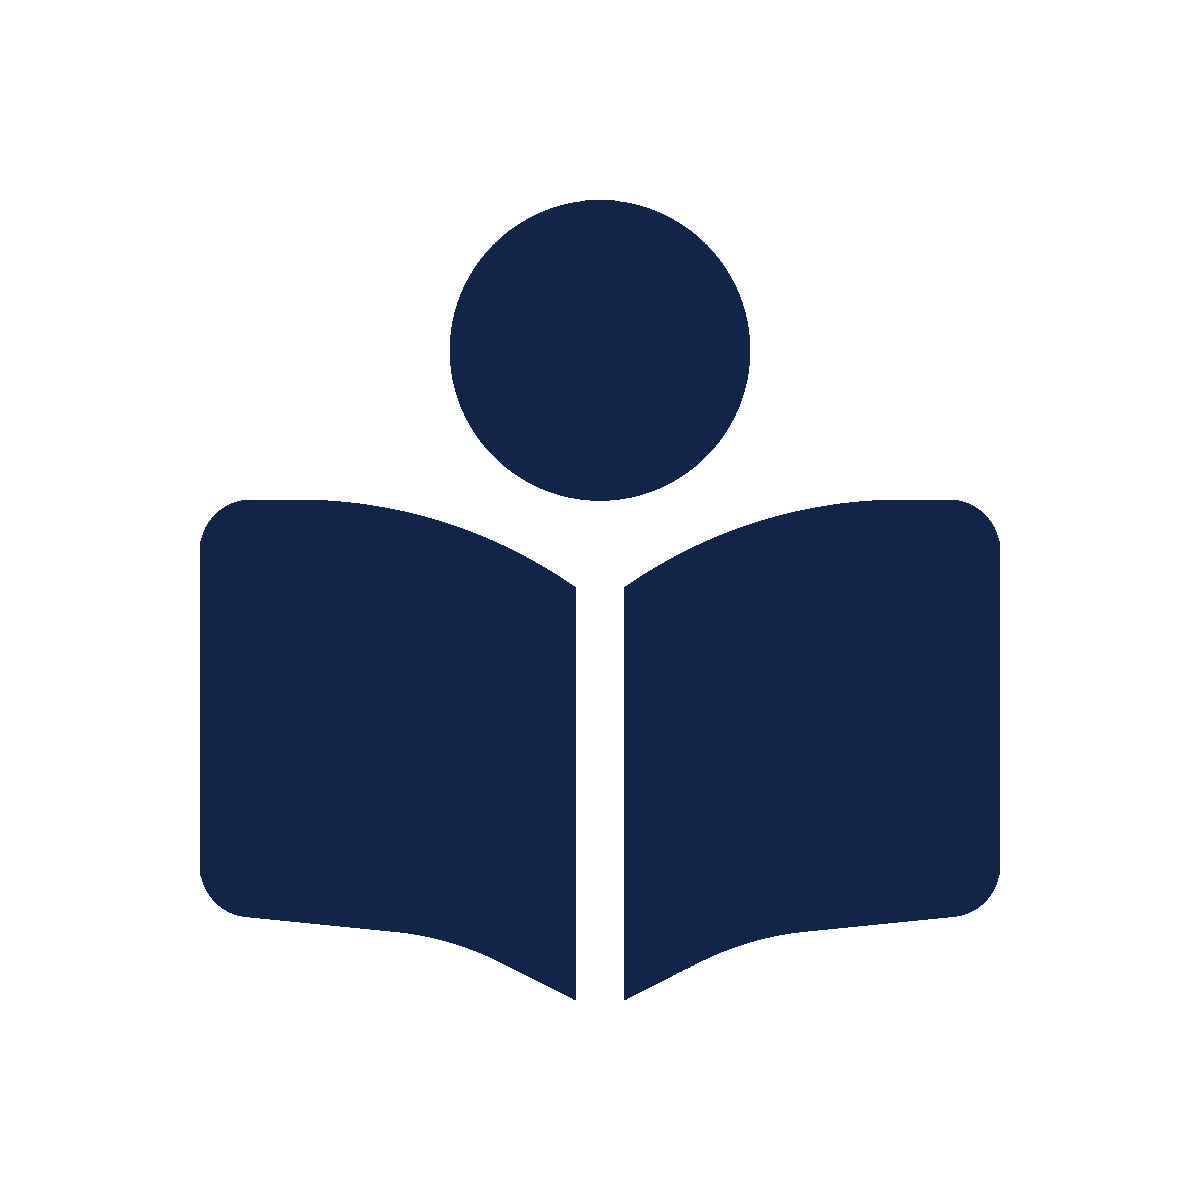 Library icon depicting a person reading a book